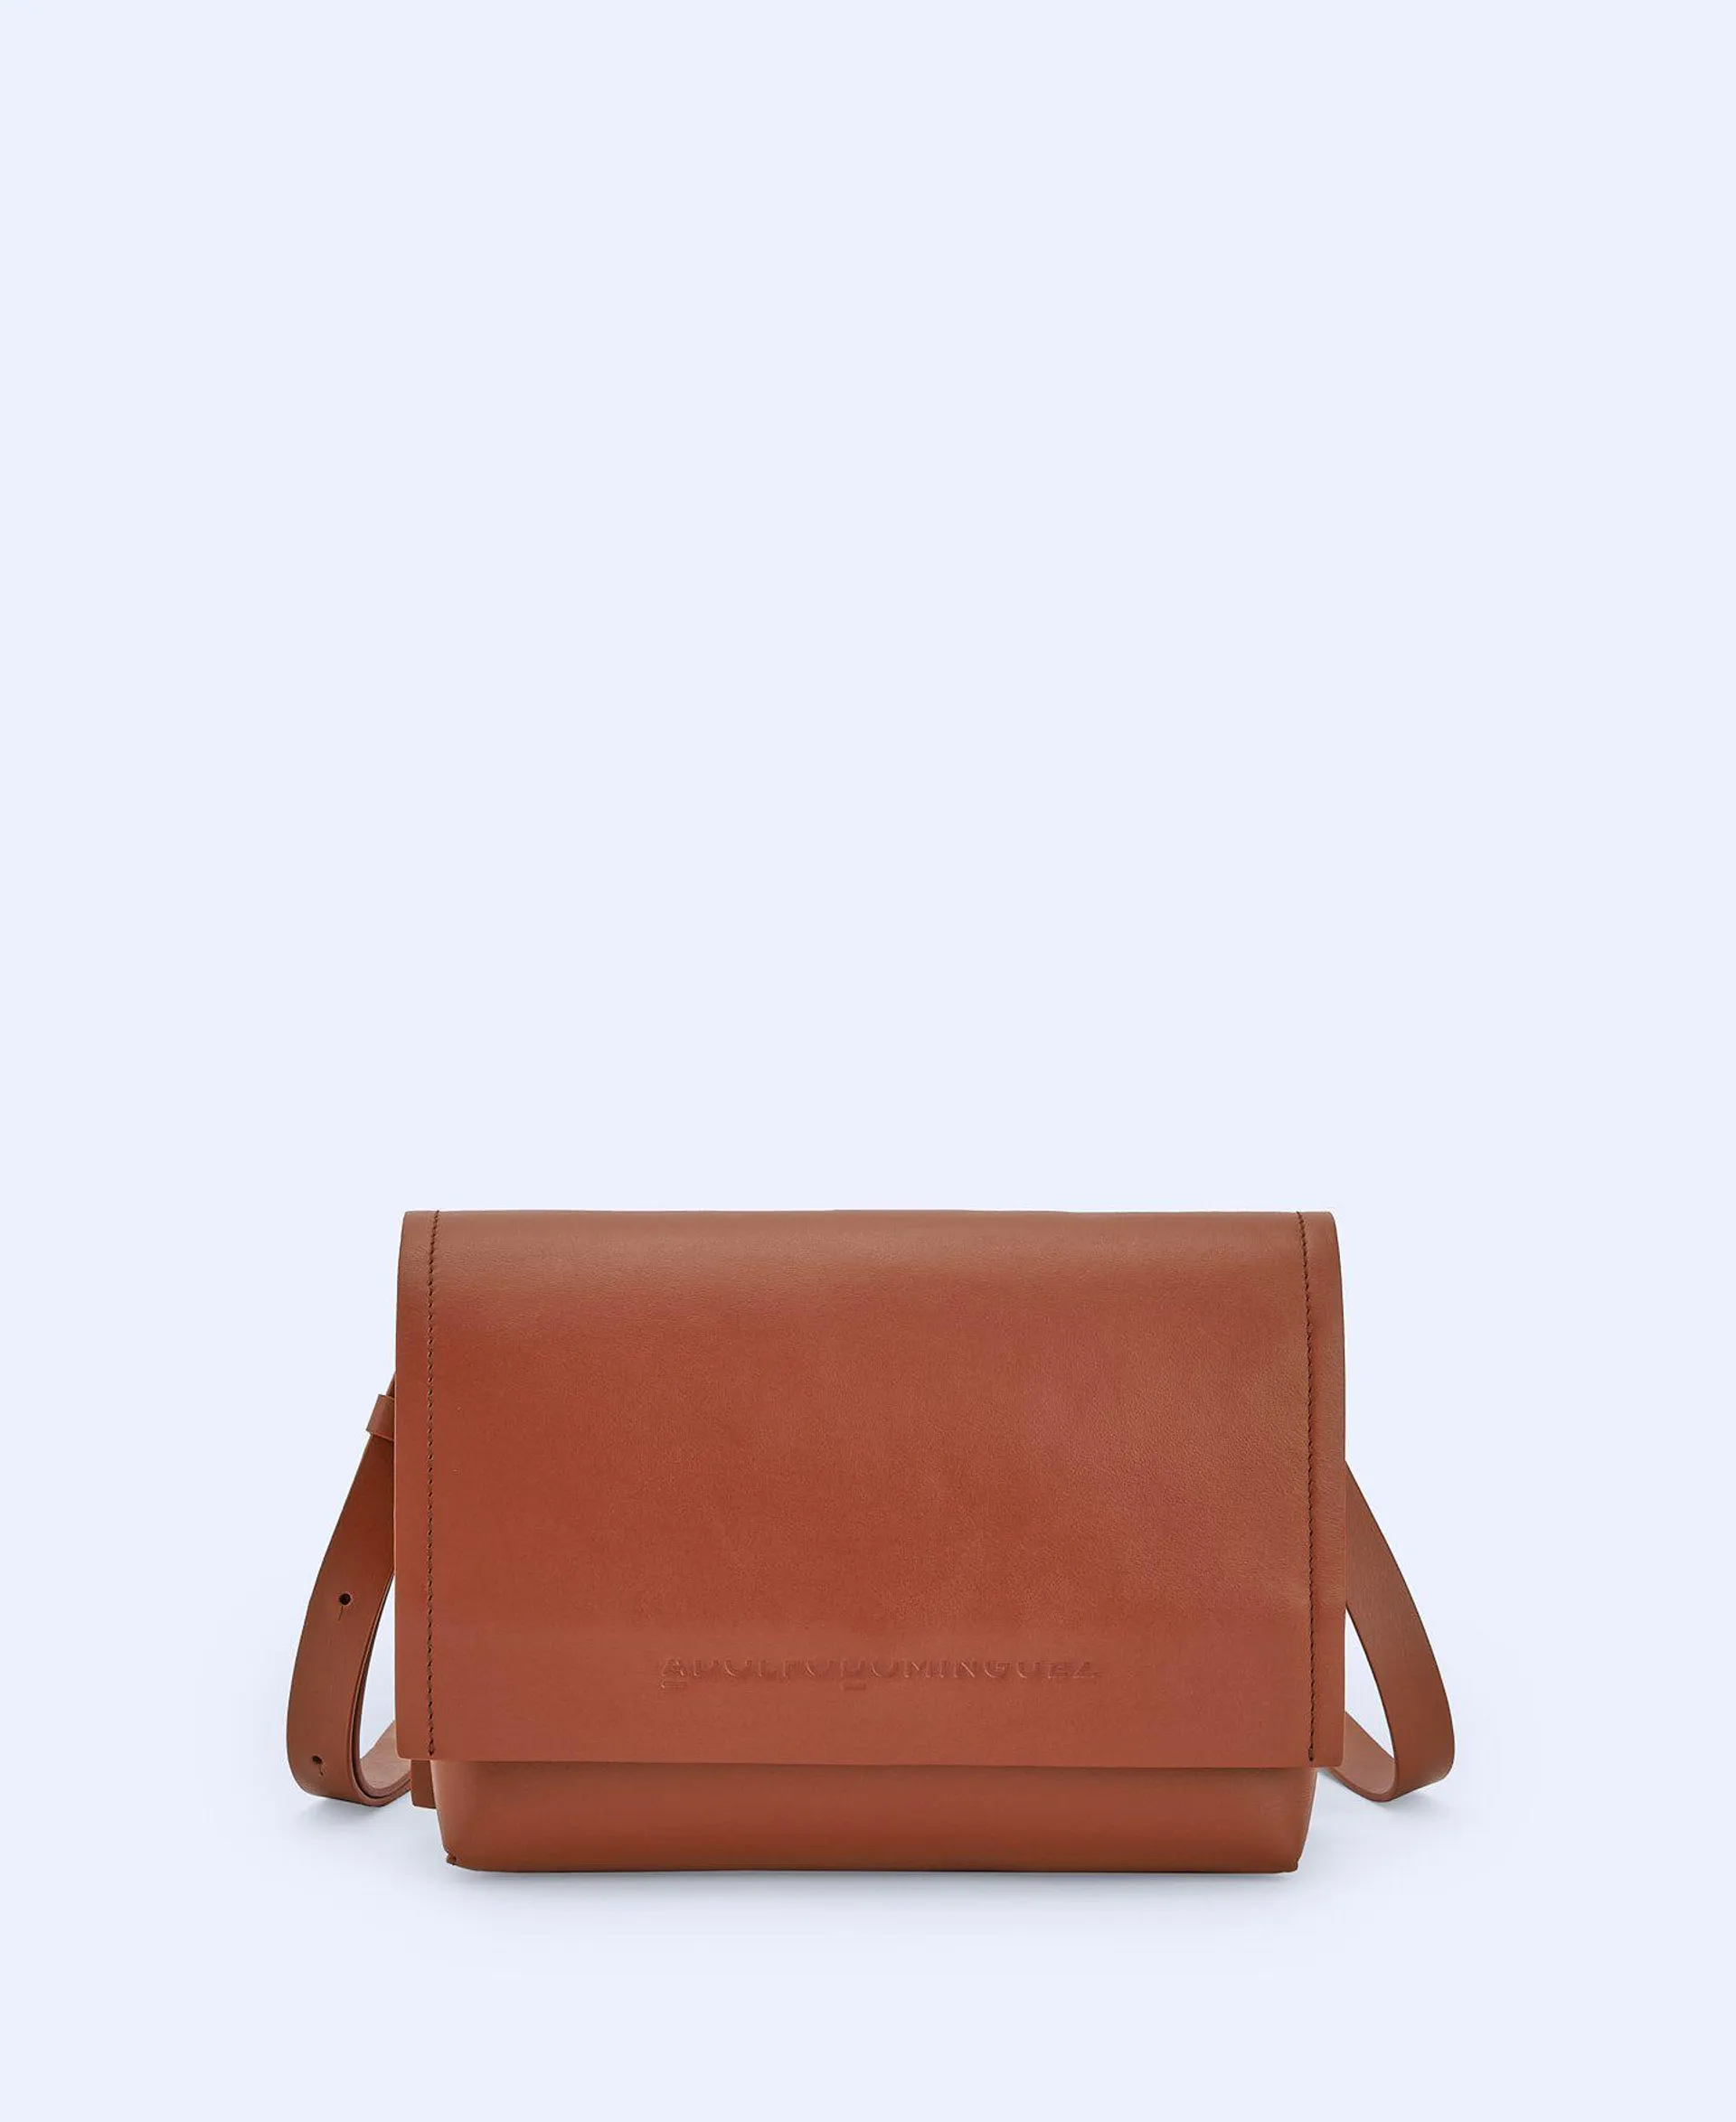 Made in Spain leather baguette bag